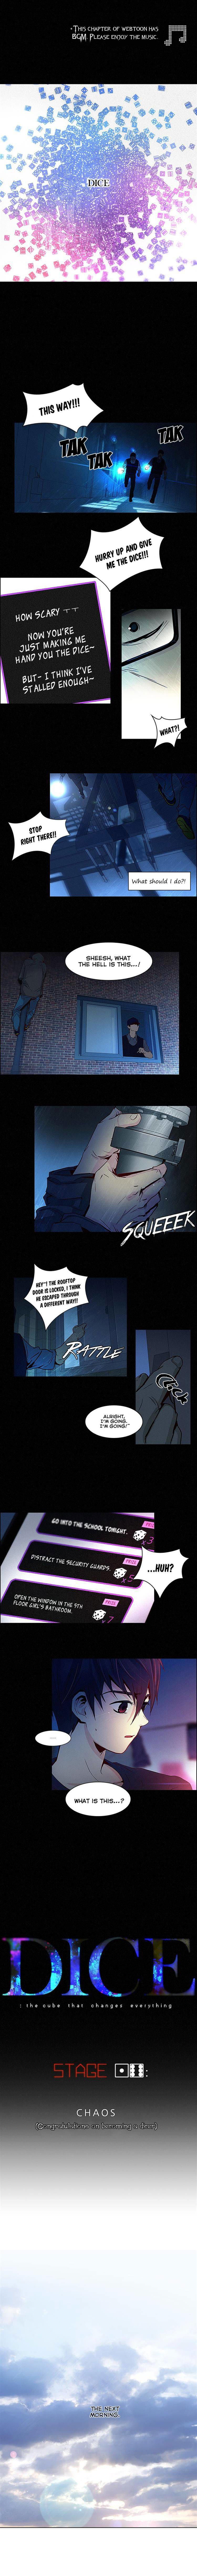 DICE: The Cube That Changes Everything Chapter 16 page 2